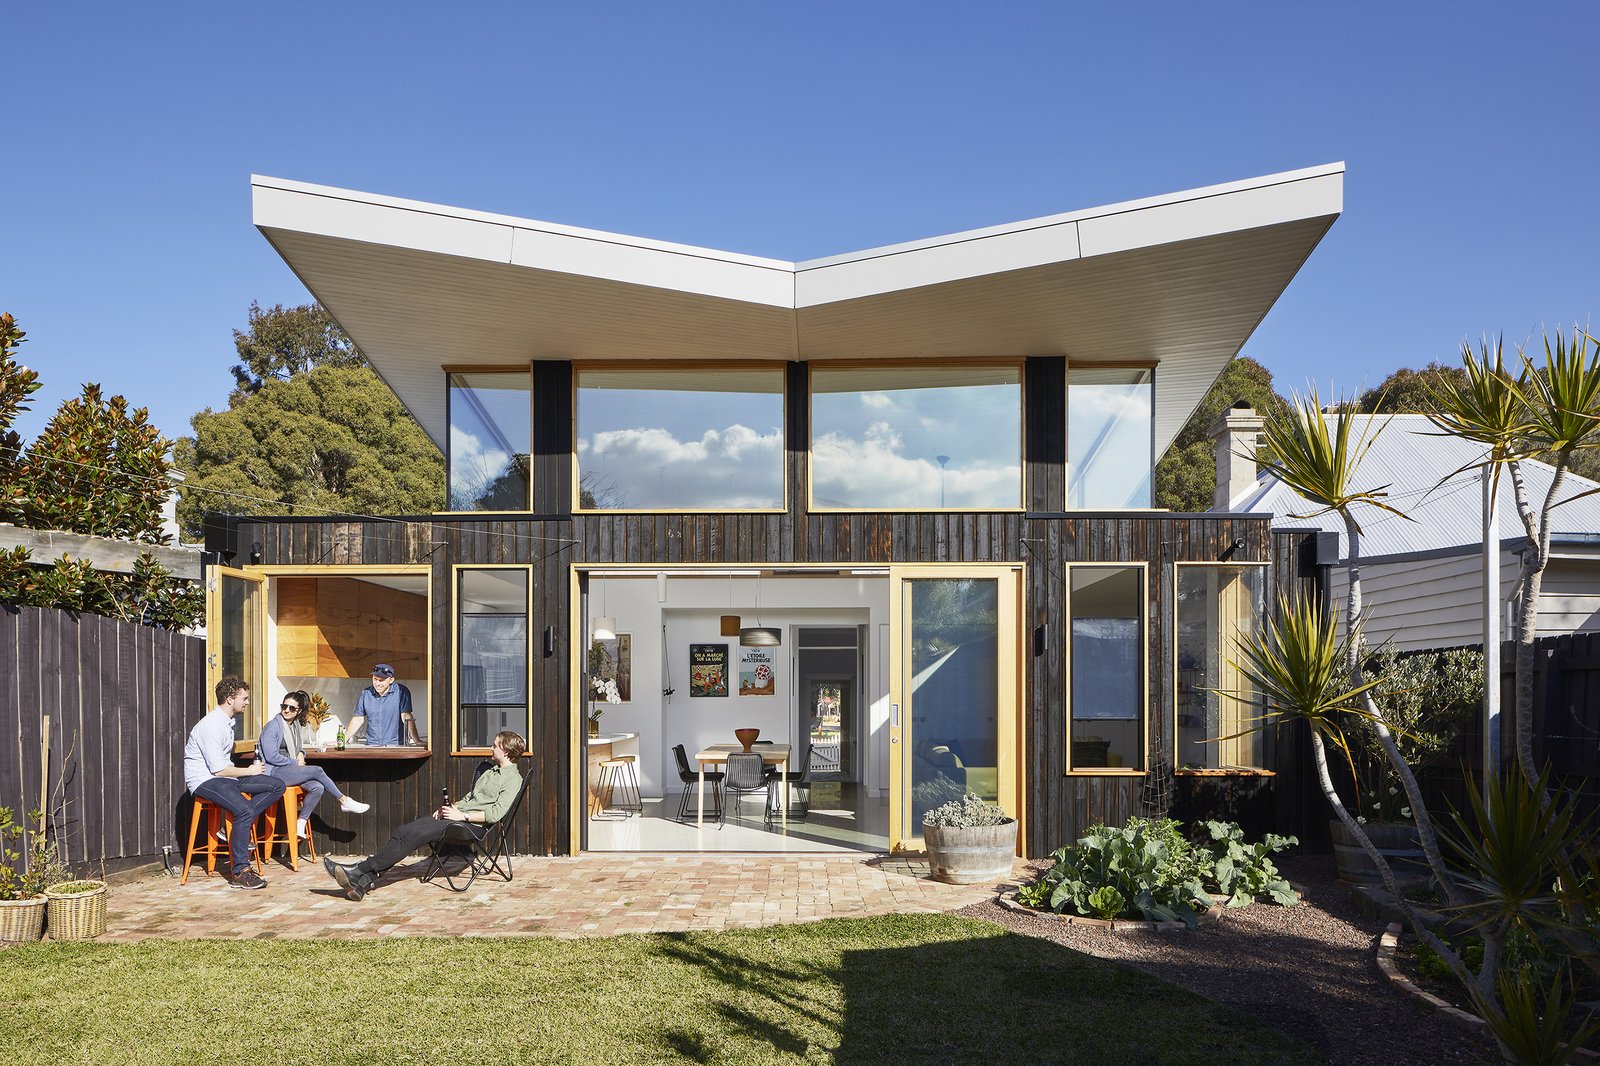 An Uplifting Melbourne Addition Embodies its Owners’ Sense of Adventure